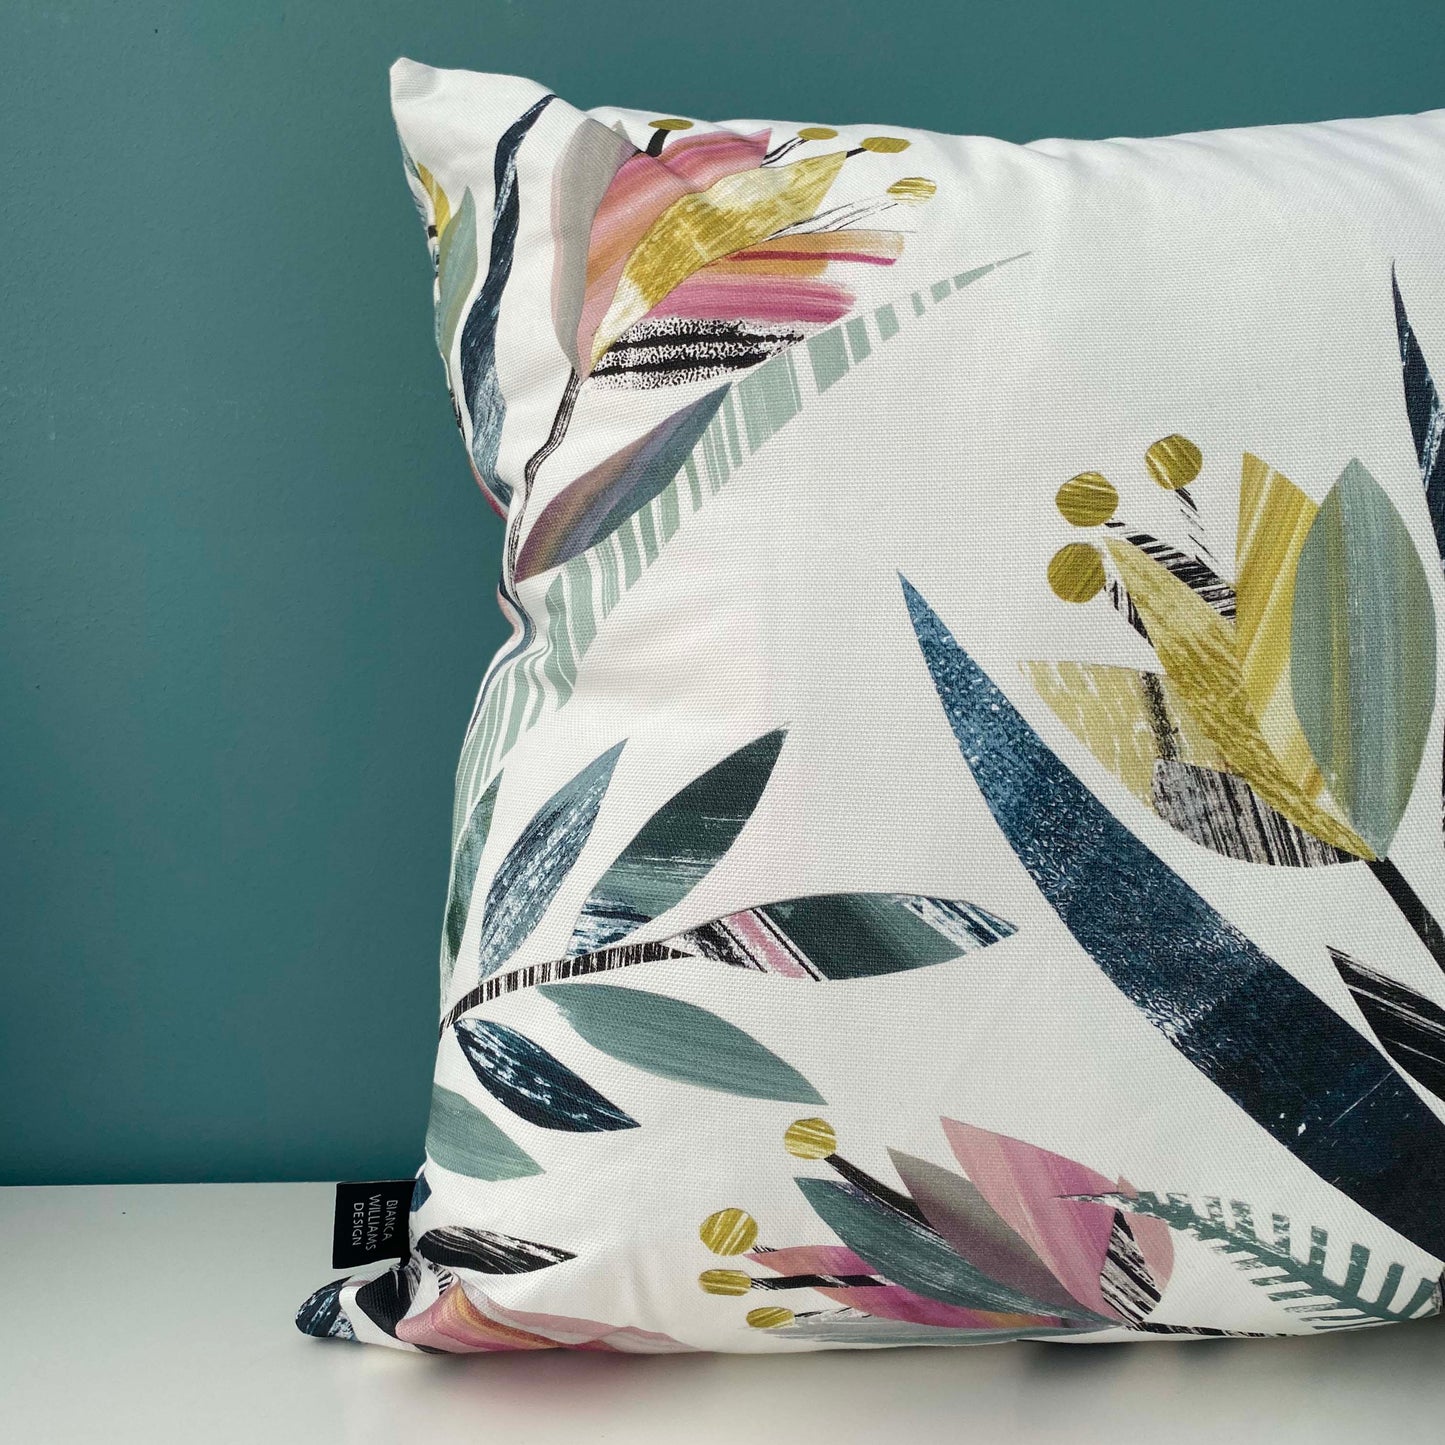 A close up of a Square Tulip Cushion featuring a textured tulip pattern in Pink, yellows, greens and grey on a white background has been placed on a white shelf against a blue/green wall.